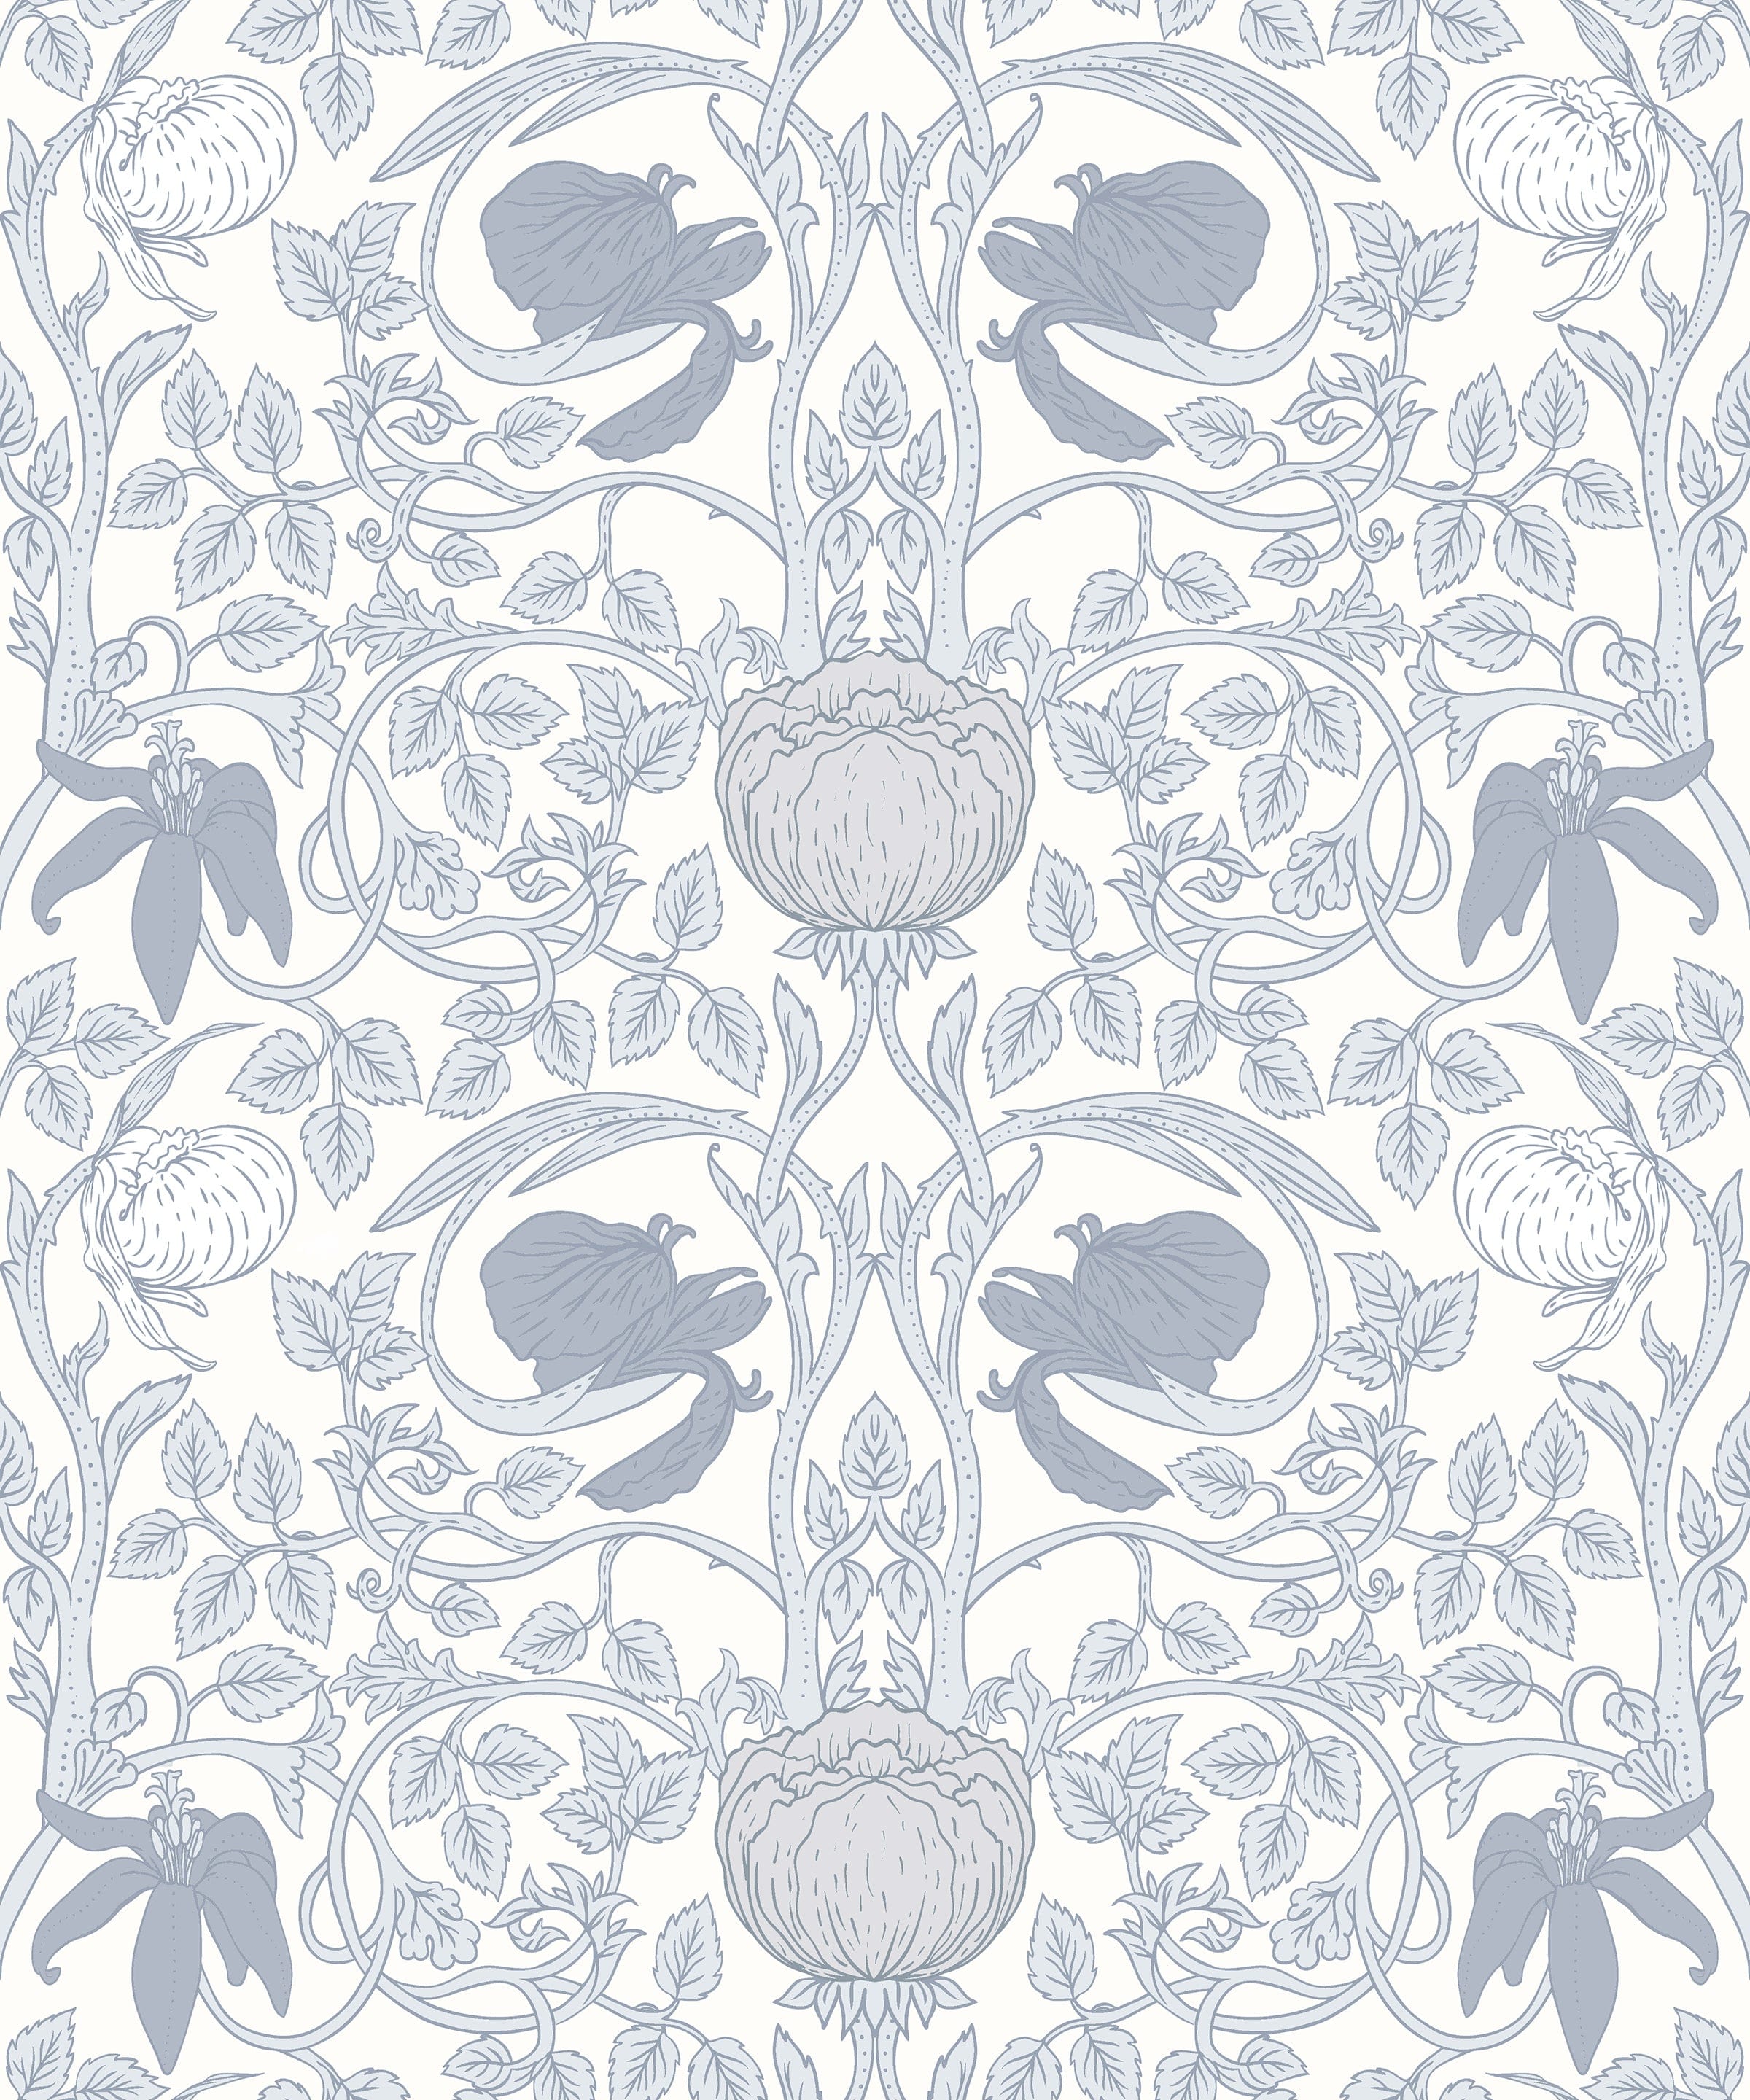 Close-up view of the Vintage Floral Damask Wallpaper highlighting the detailed blue floral and foliage pattern on a white background.